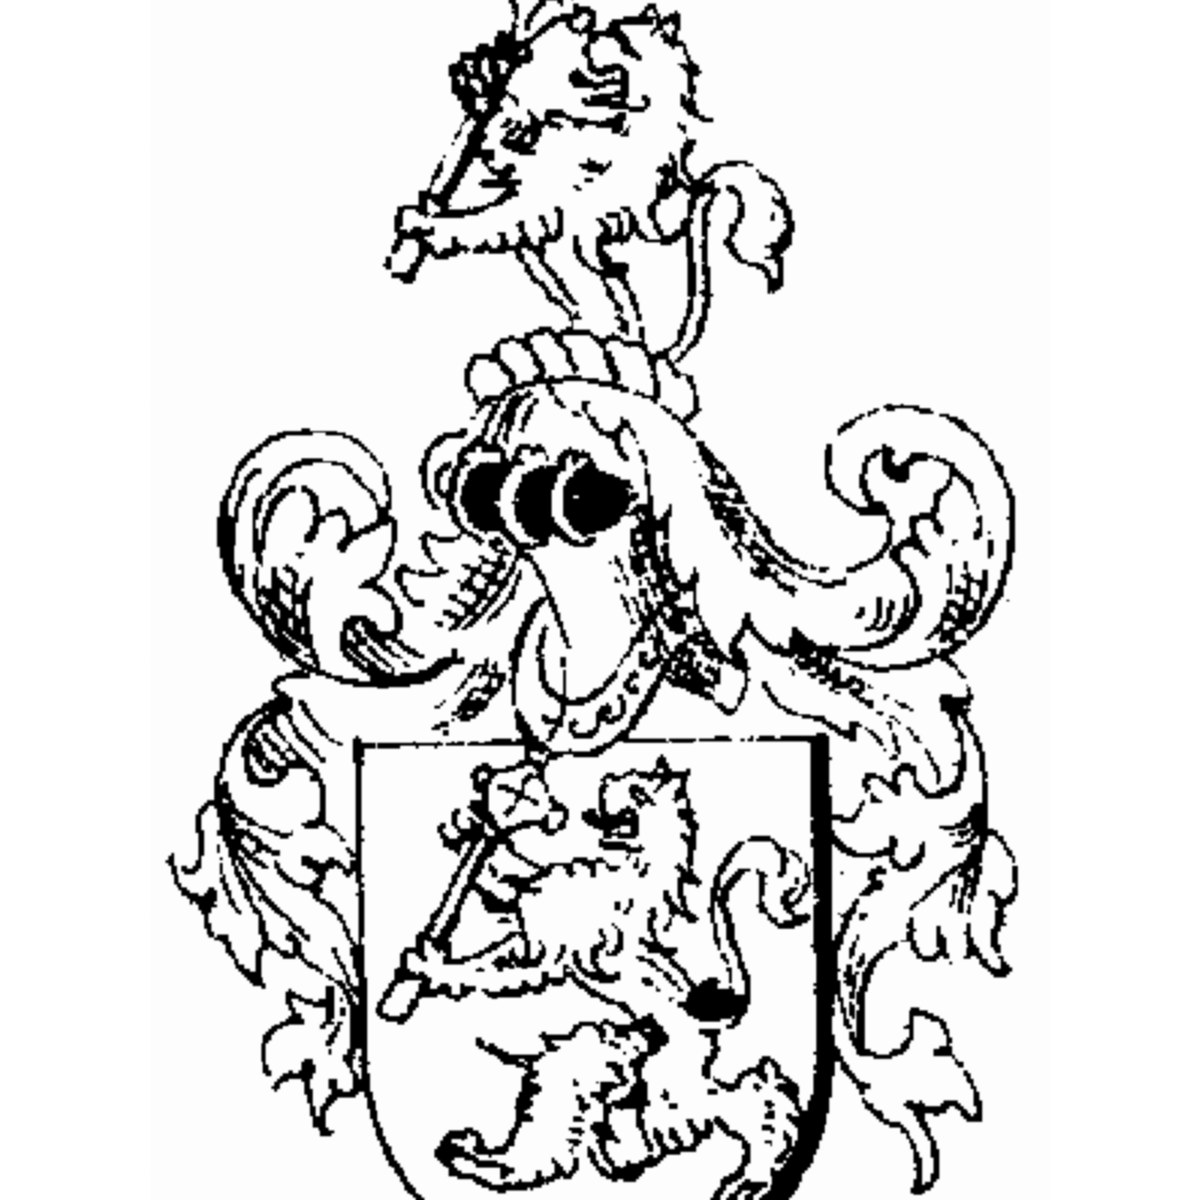 Coat of arms of family Vincent